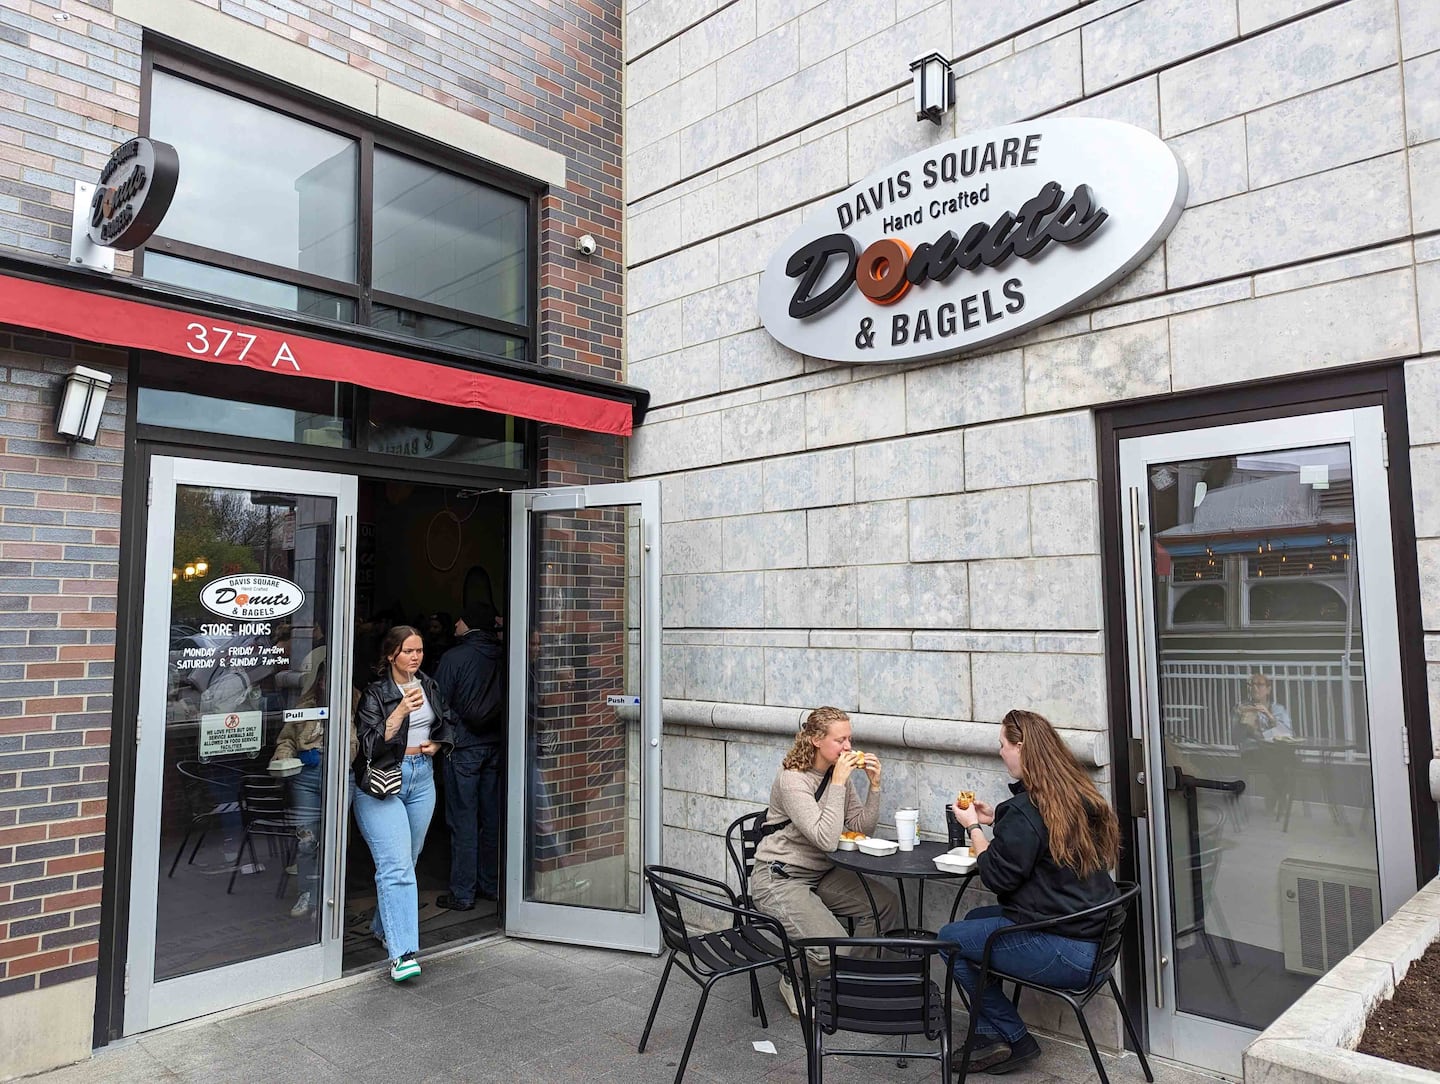 Davis Square Donuts & Bagels is a favorite for visitors who like a sweet breakfast.